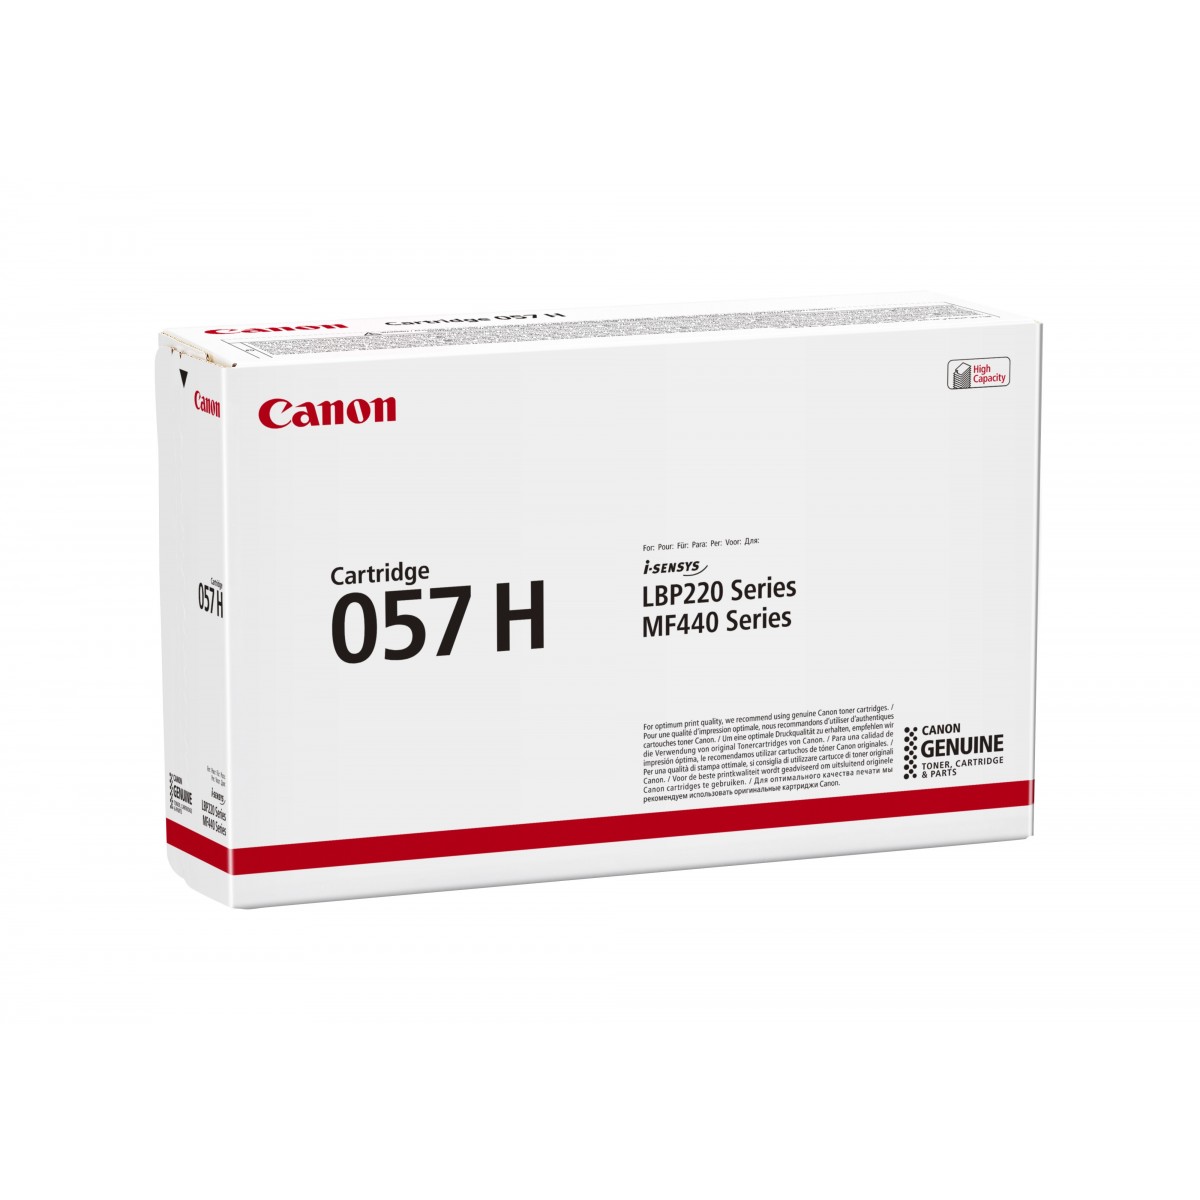 Canon i-SENSYS 057H - 10000 pages - Black - 1 pc(s)